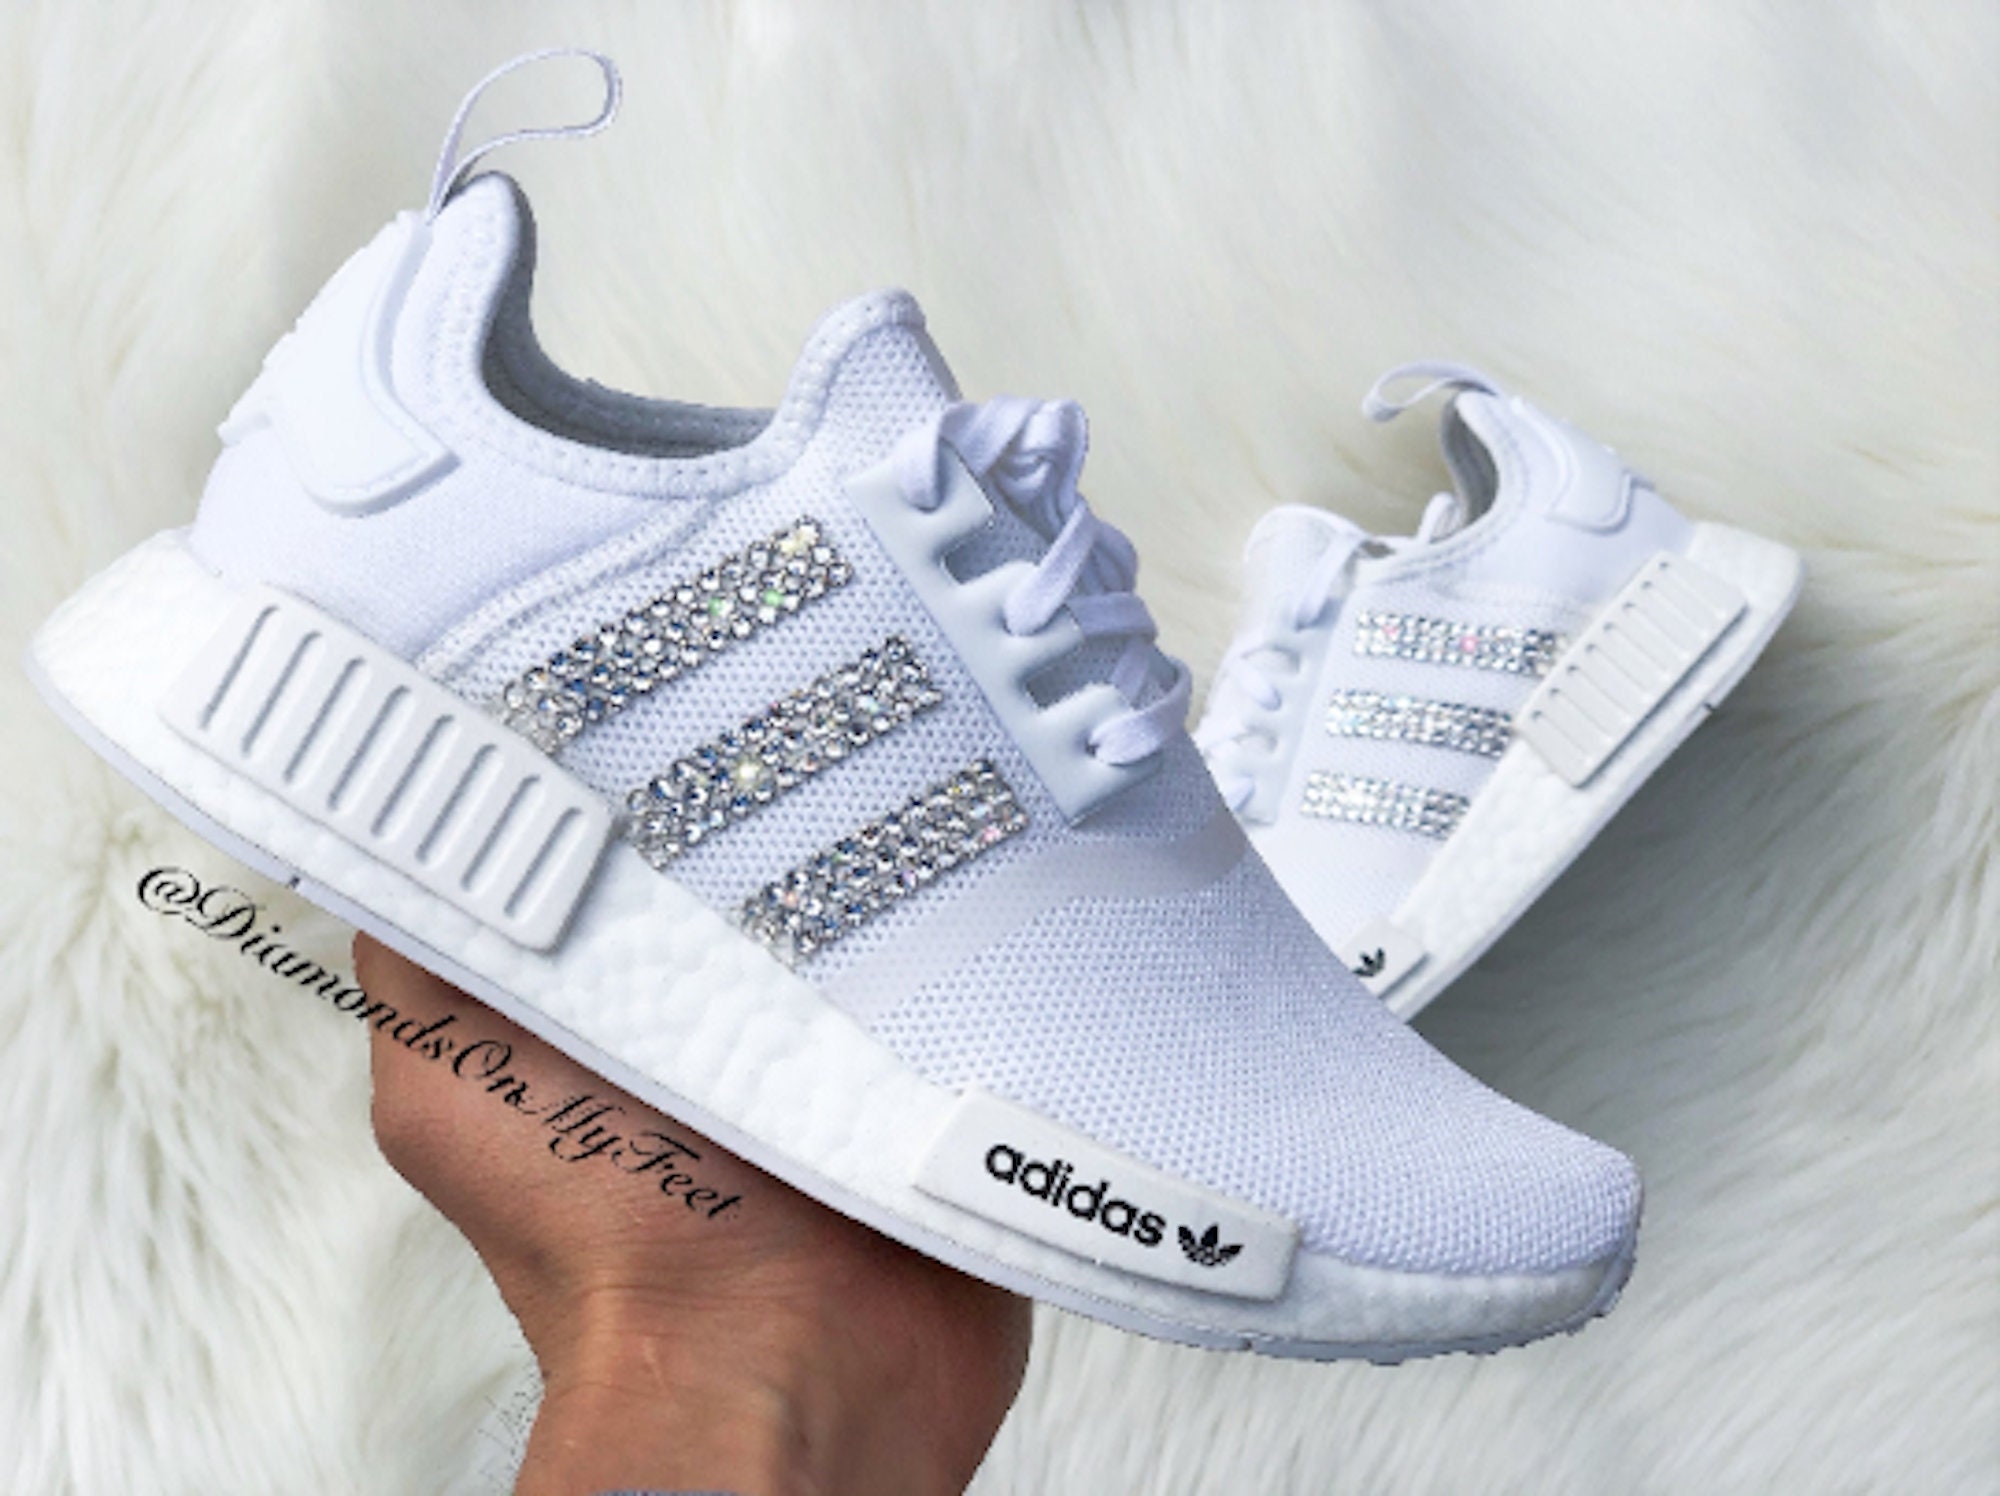 Swarovski Womens NMD R1 All White Sneakers Blinged Out With - Etsy Denmark